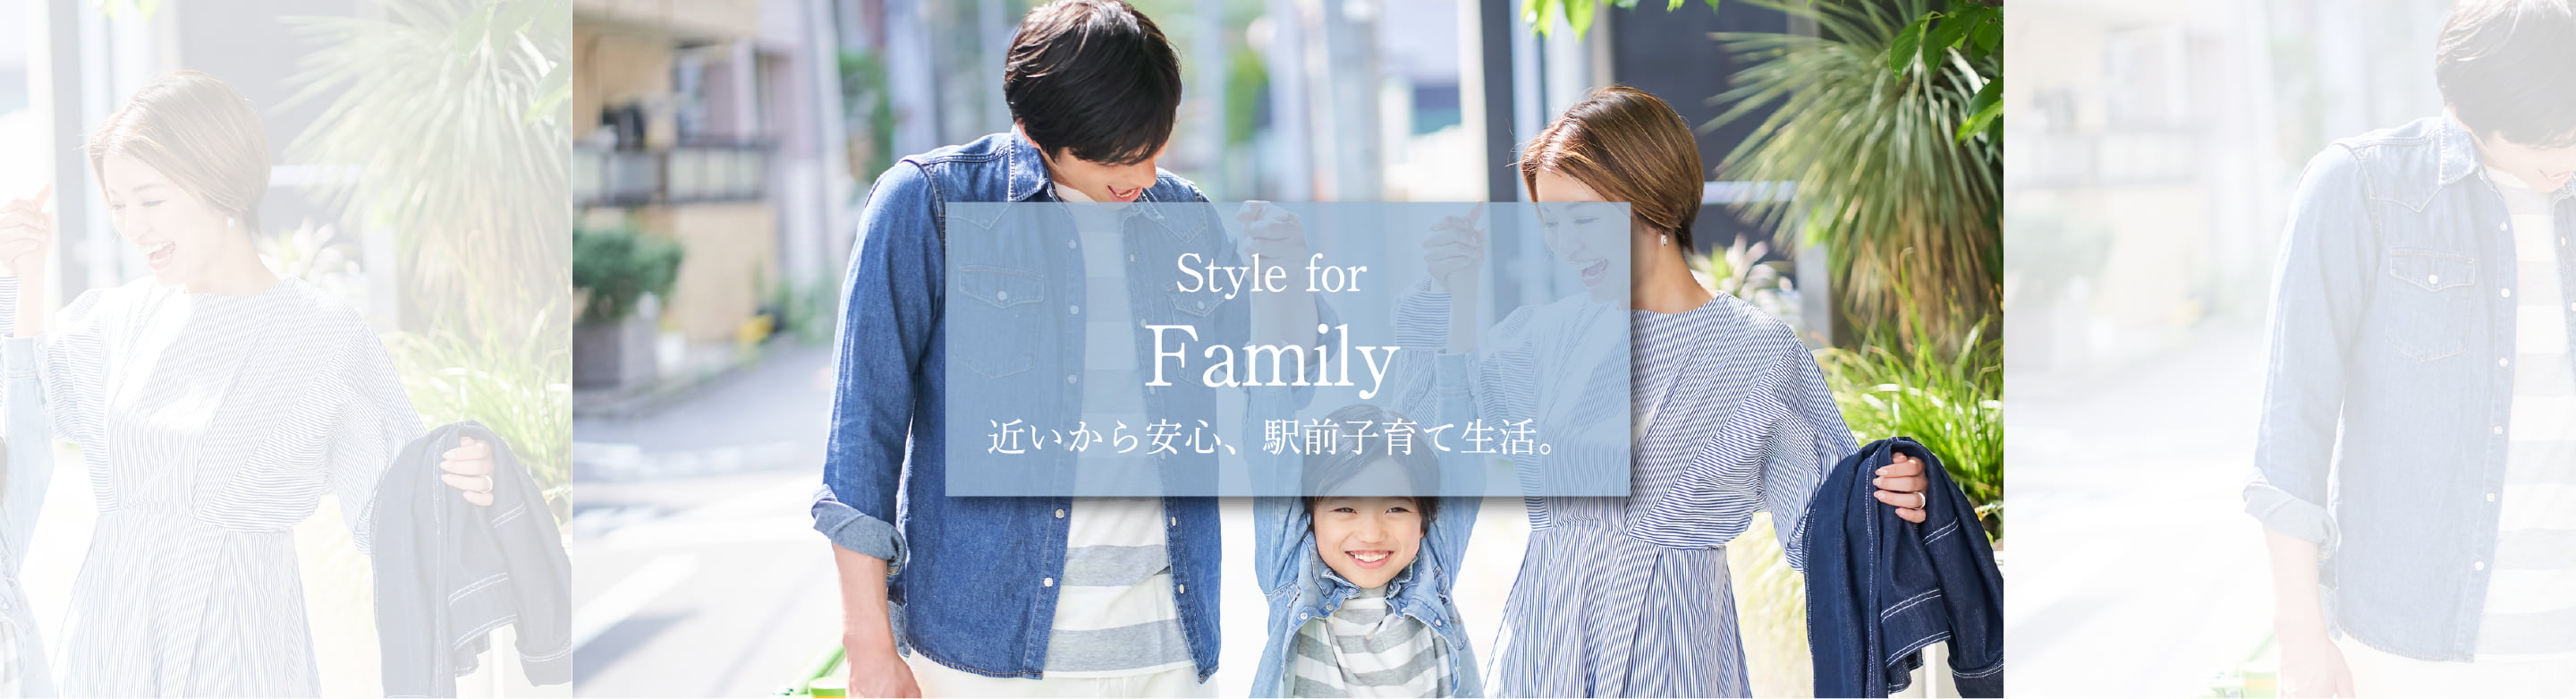 Style for Family